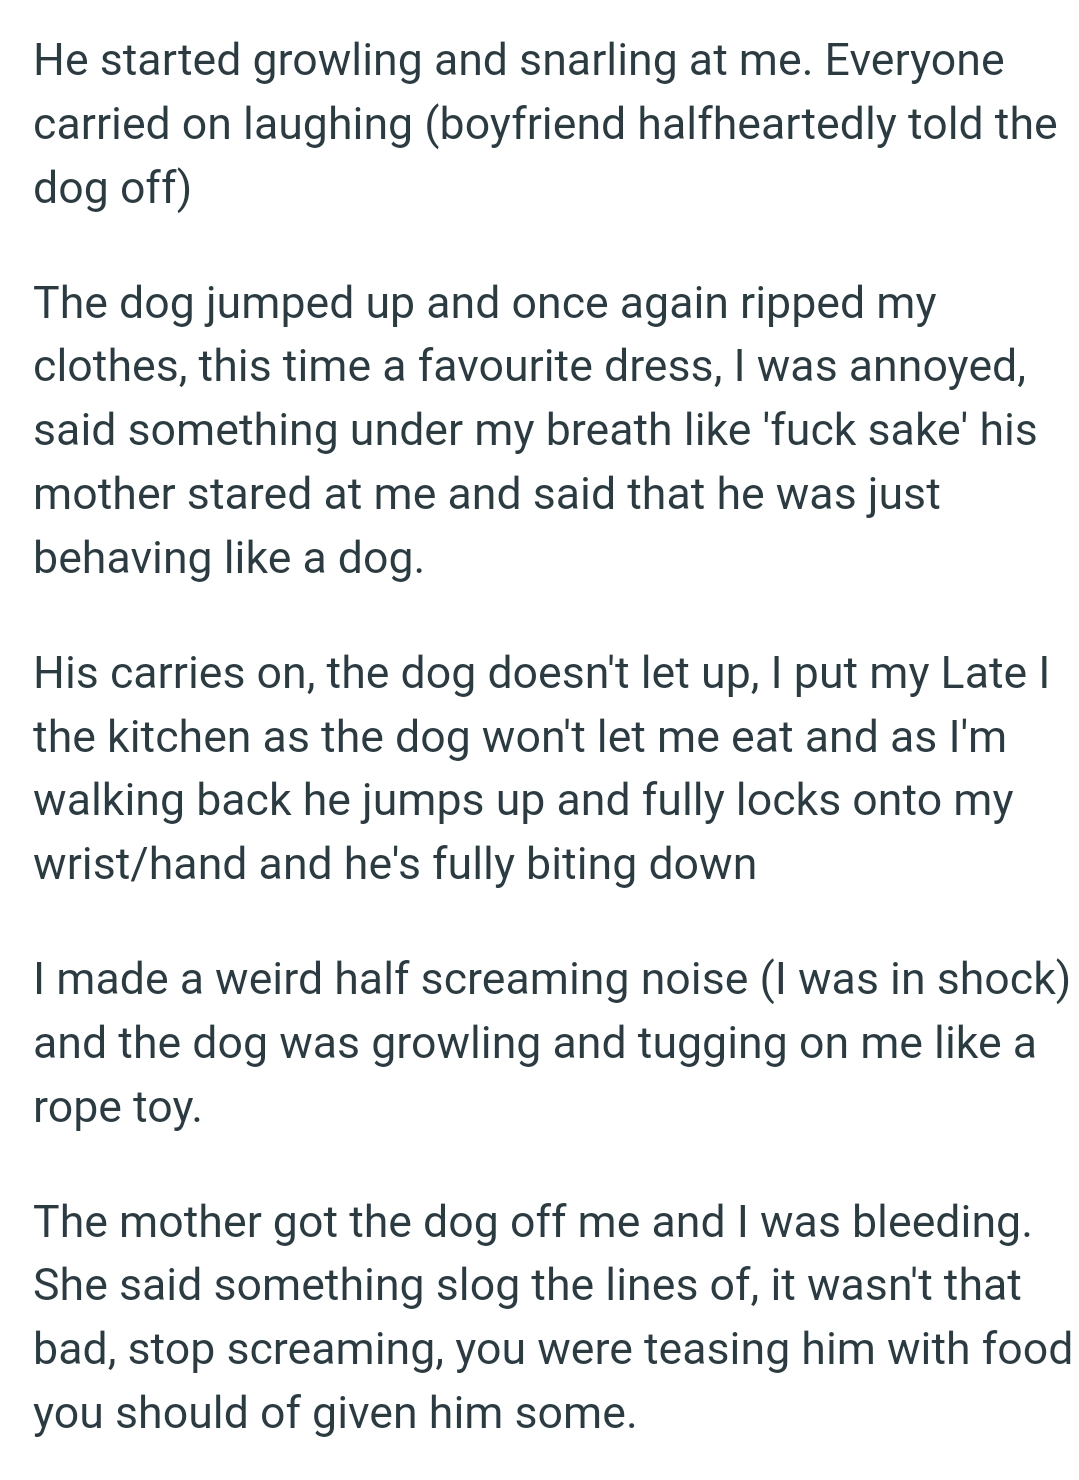 BF's mother stared at the OP and said that the dog was just behaving like a dog